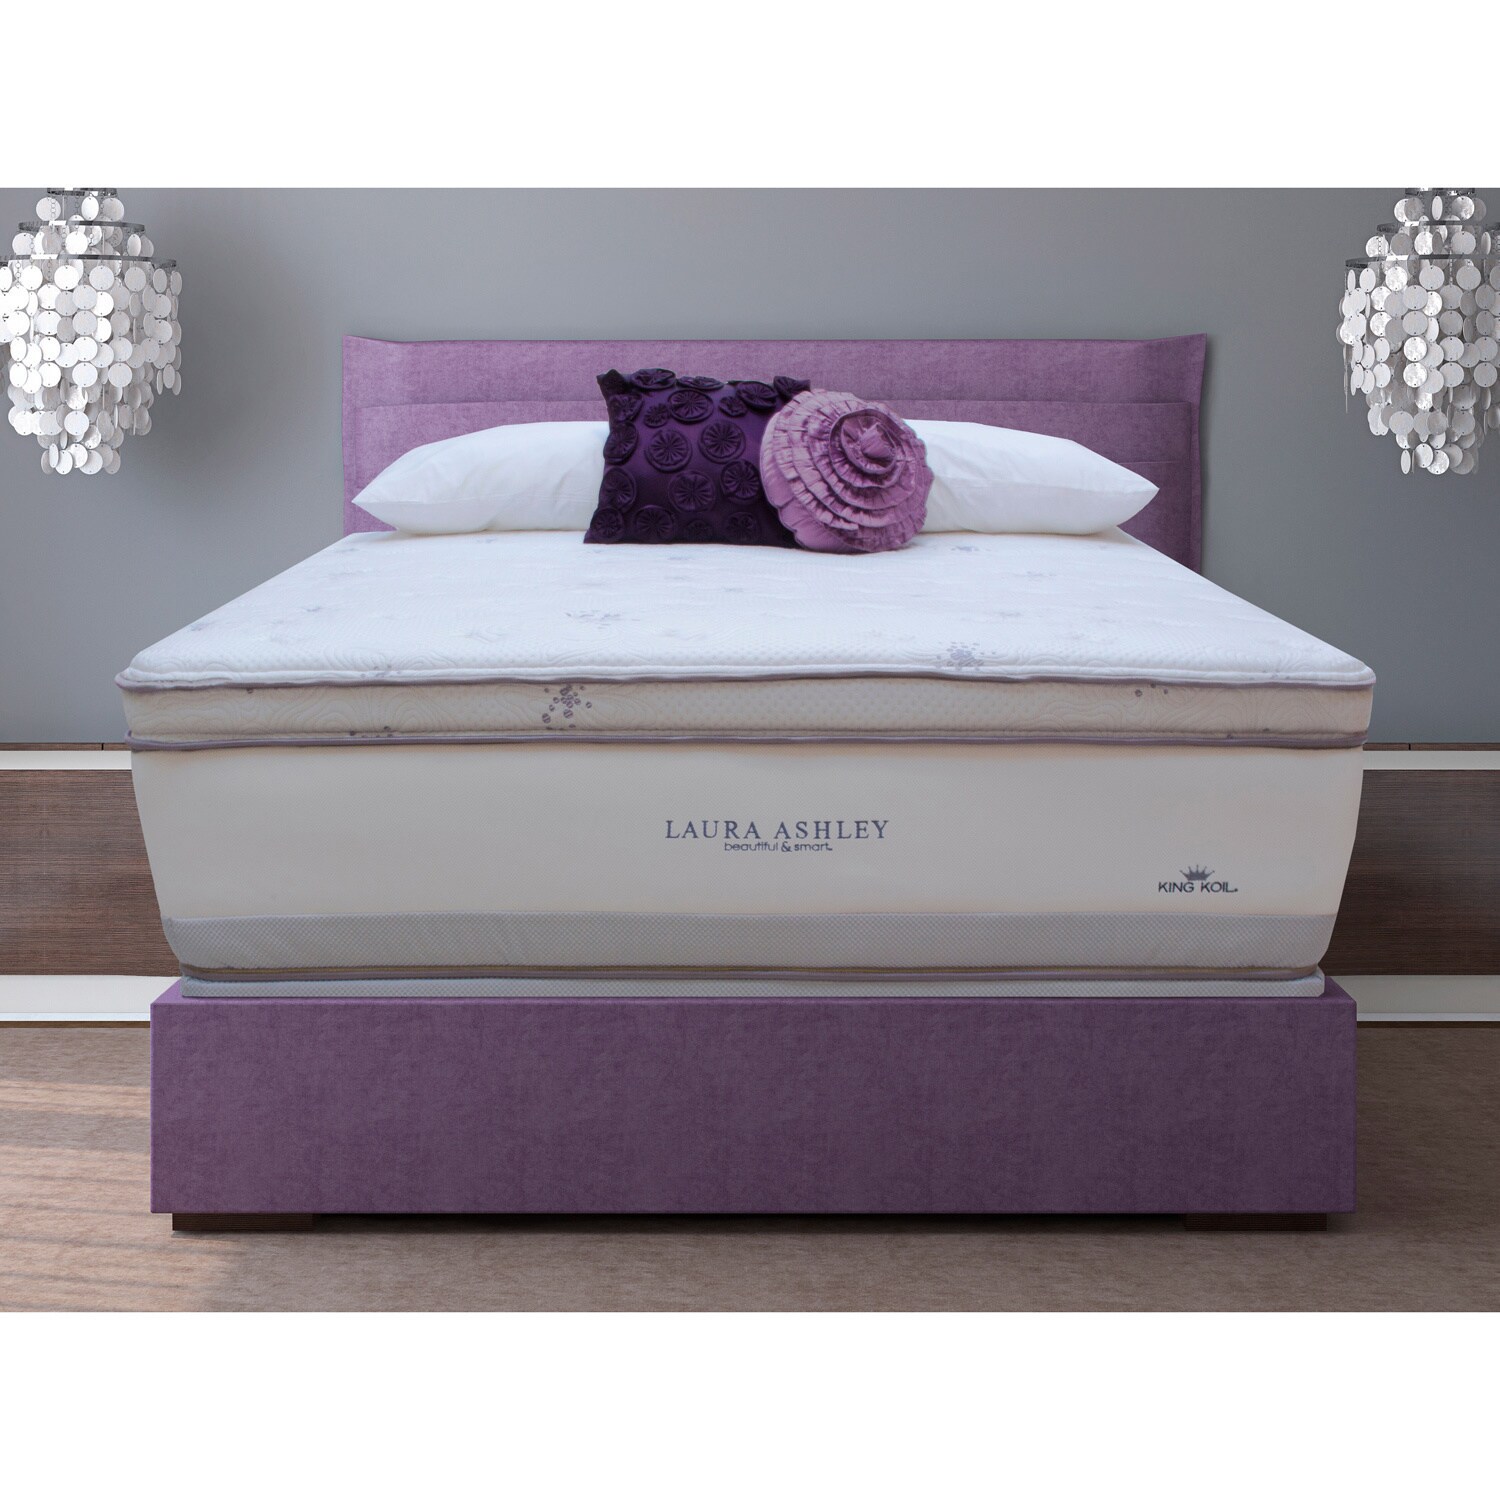 Laura Ashley Laura Ashley Periwinkle Super Size Queen size Mattress And Foundation Set White Size Queen